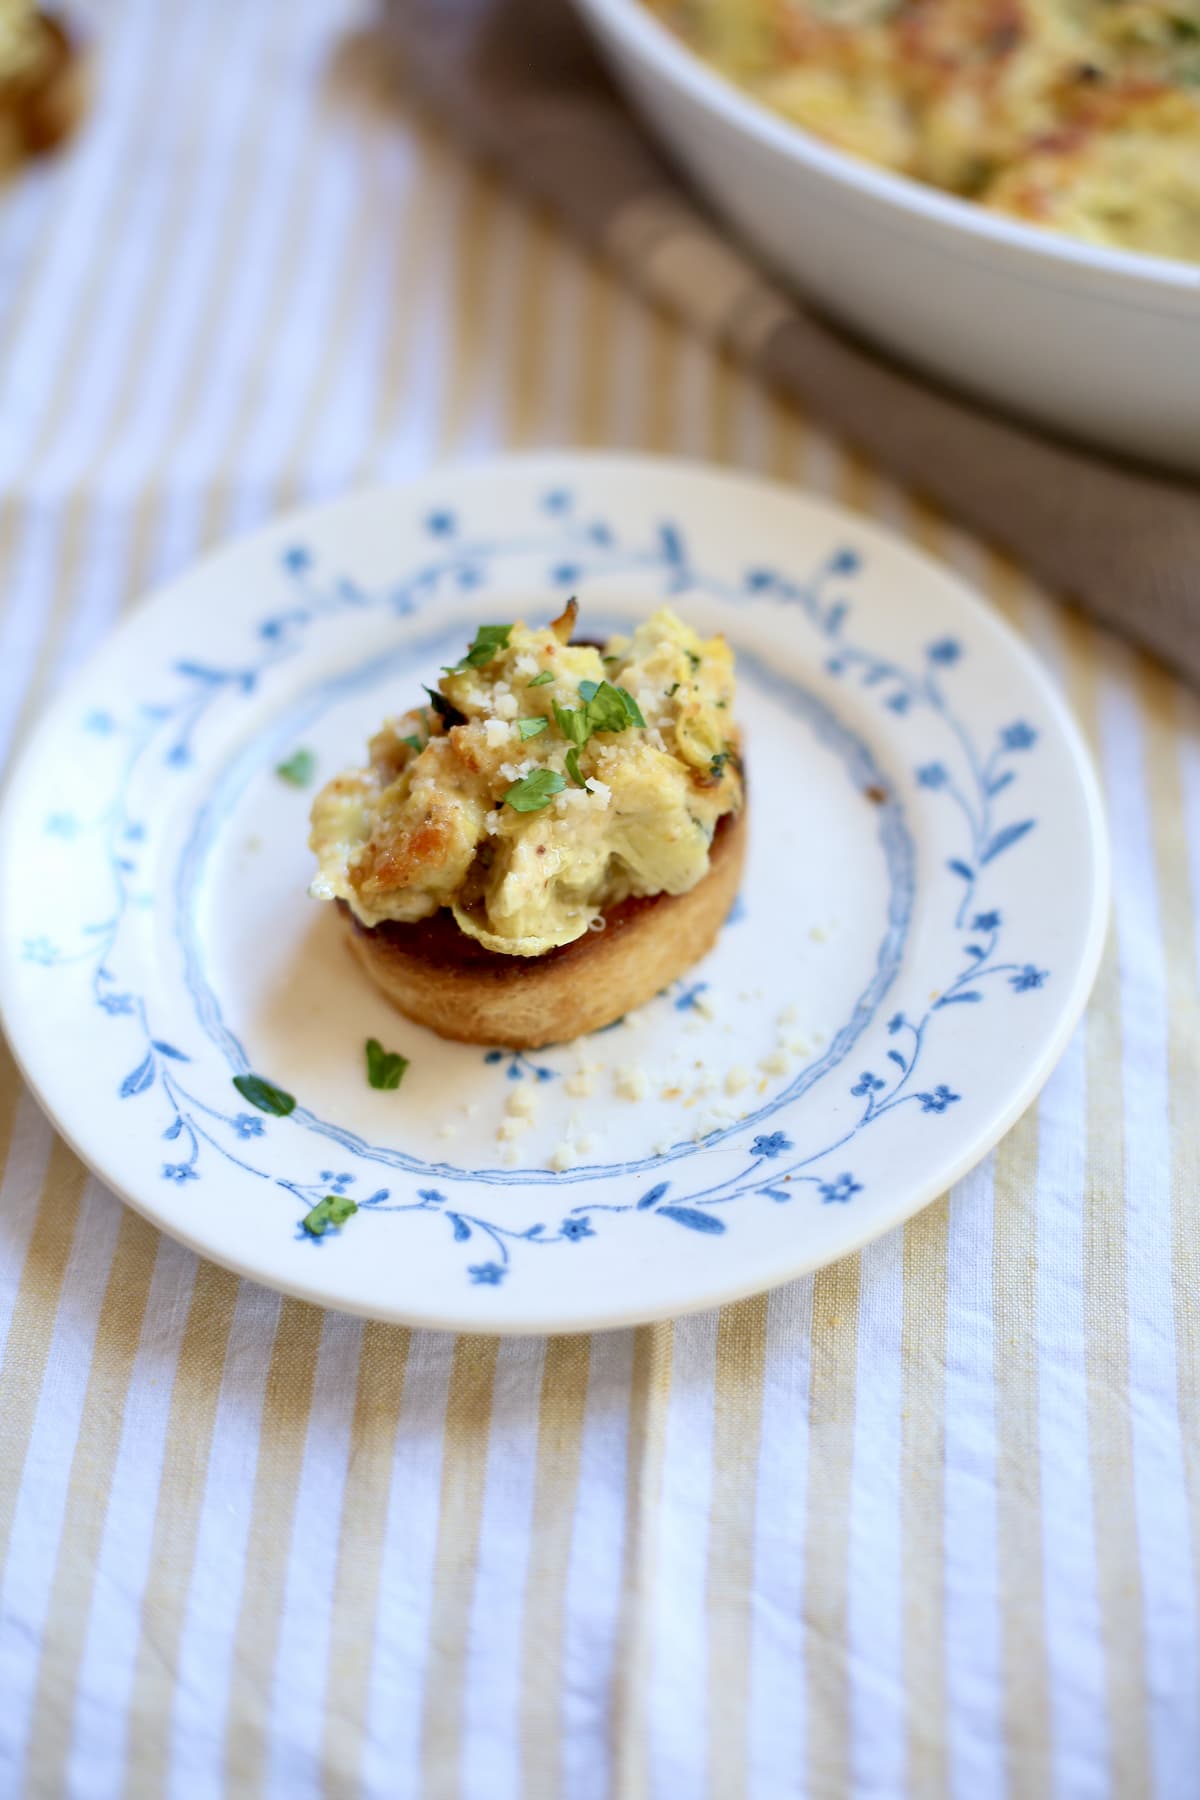 one piece of toasted bread with lemon artichoke dip on it on a blue flowered plate